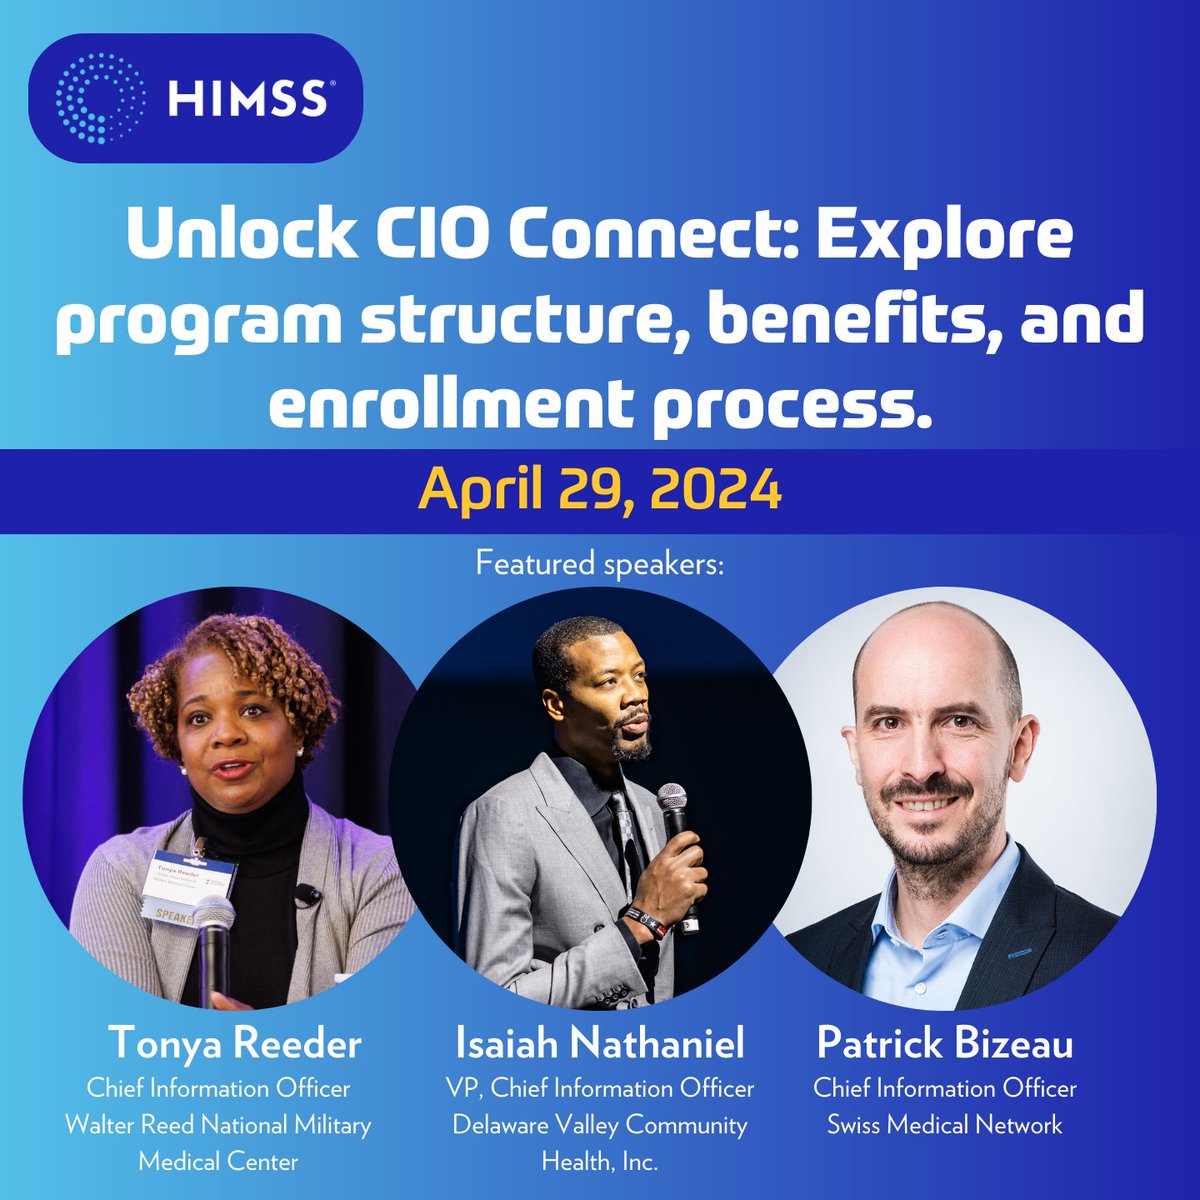 Curious to learn more about CIO Connect? Don't miss this webinar! You'll hear insights from Program Chair, Isaiah Nathaniel, and standout graduates Patrick Bizeau and Tonya Reeder from our 2023 cohort. Register here: bit.ly/44jaDUd